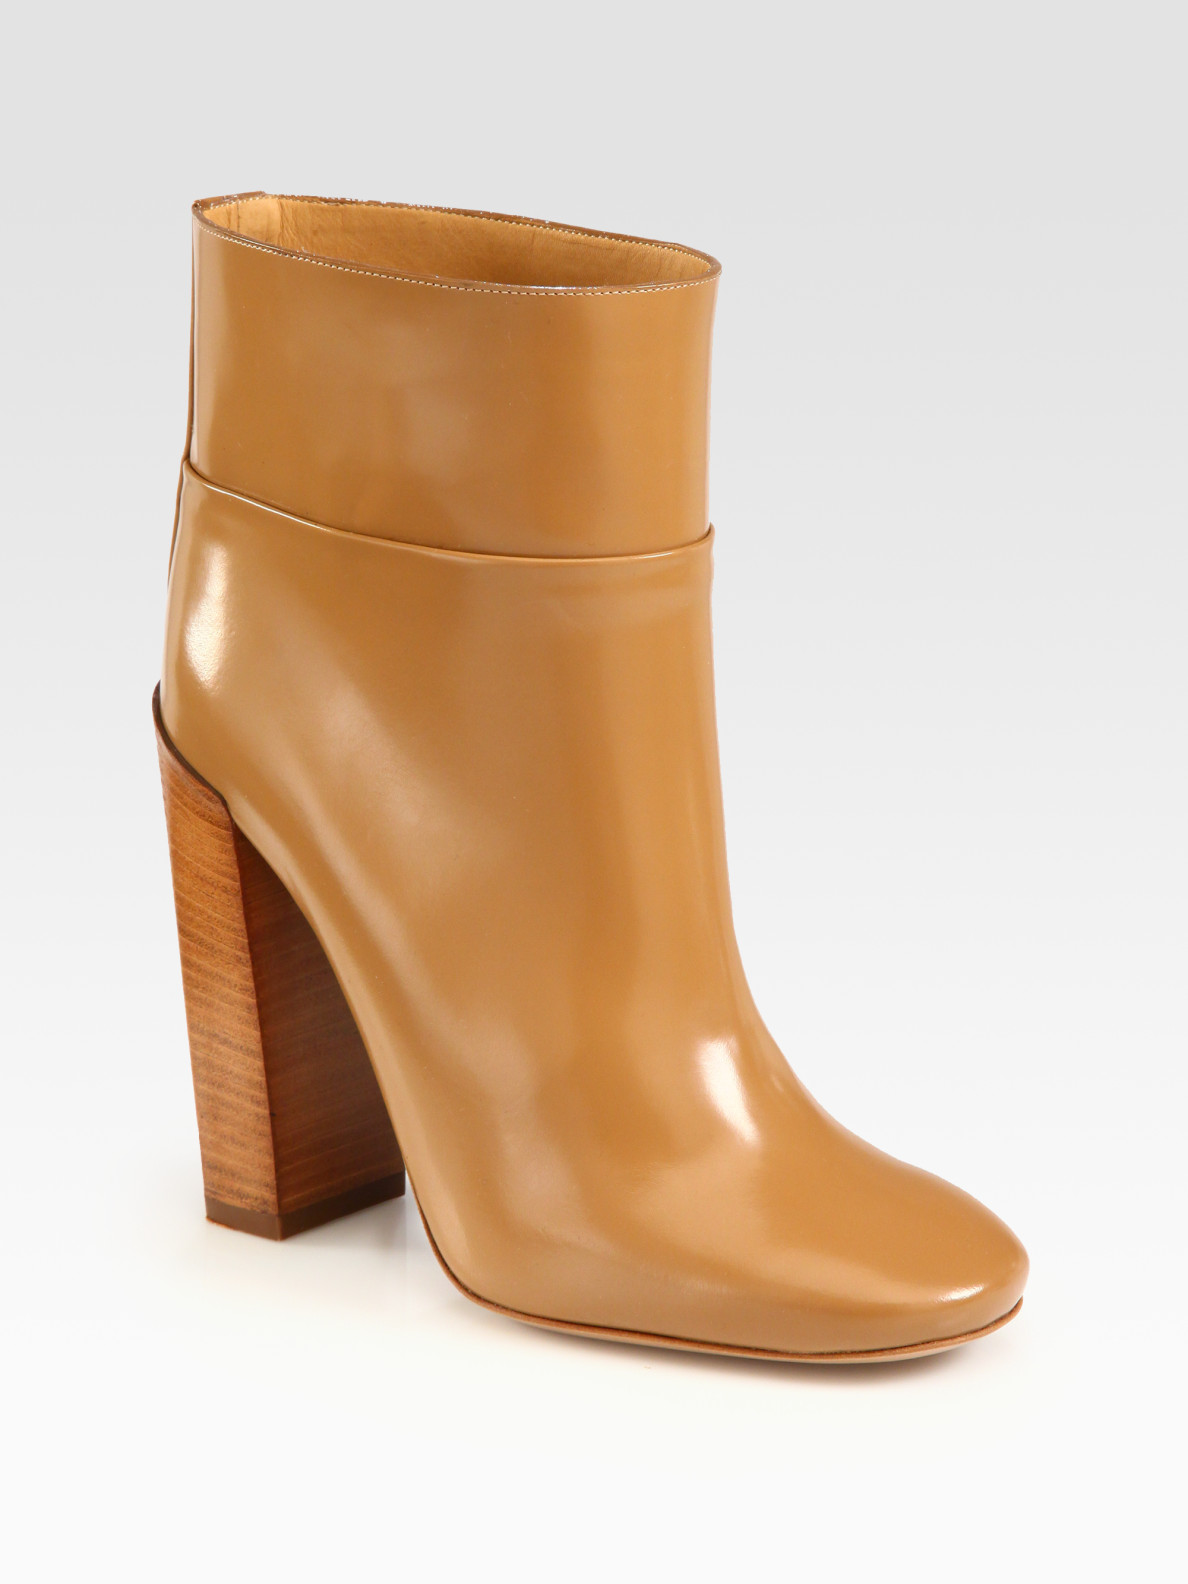 Chloé Leather Ankle Boots in Camel 